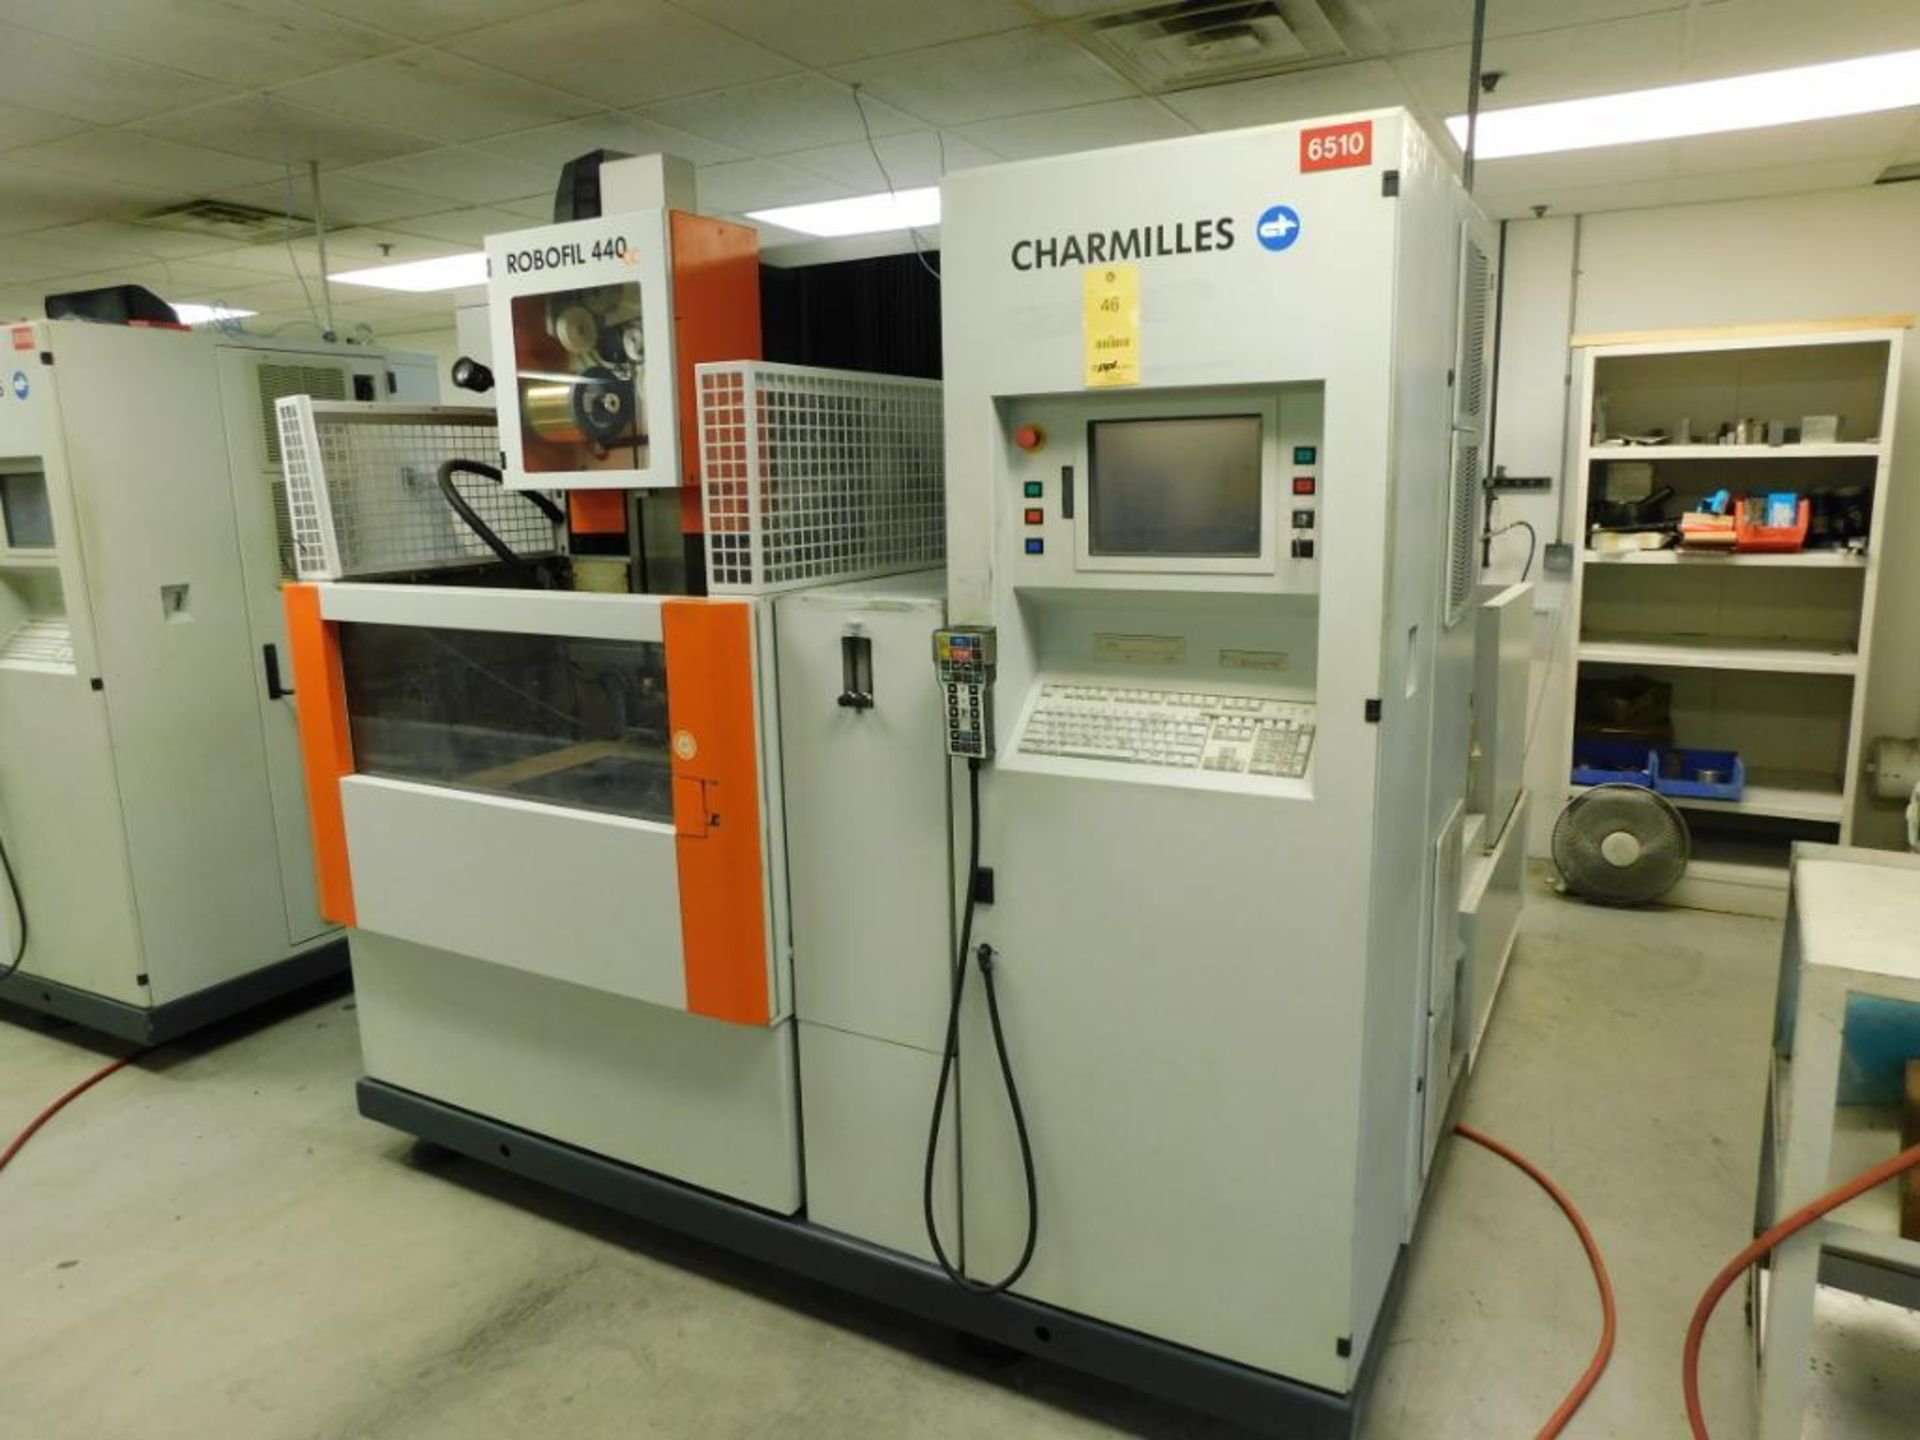 Charmilles CNC Wire EDM Machine, Model Robofil 440 CC, S/N 931402, 21.65 in. X-Axis, 13.78 in. Y-Axi